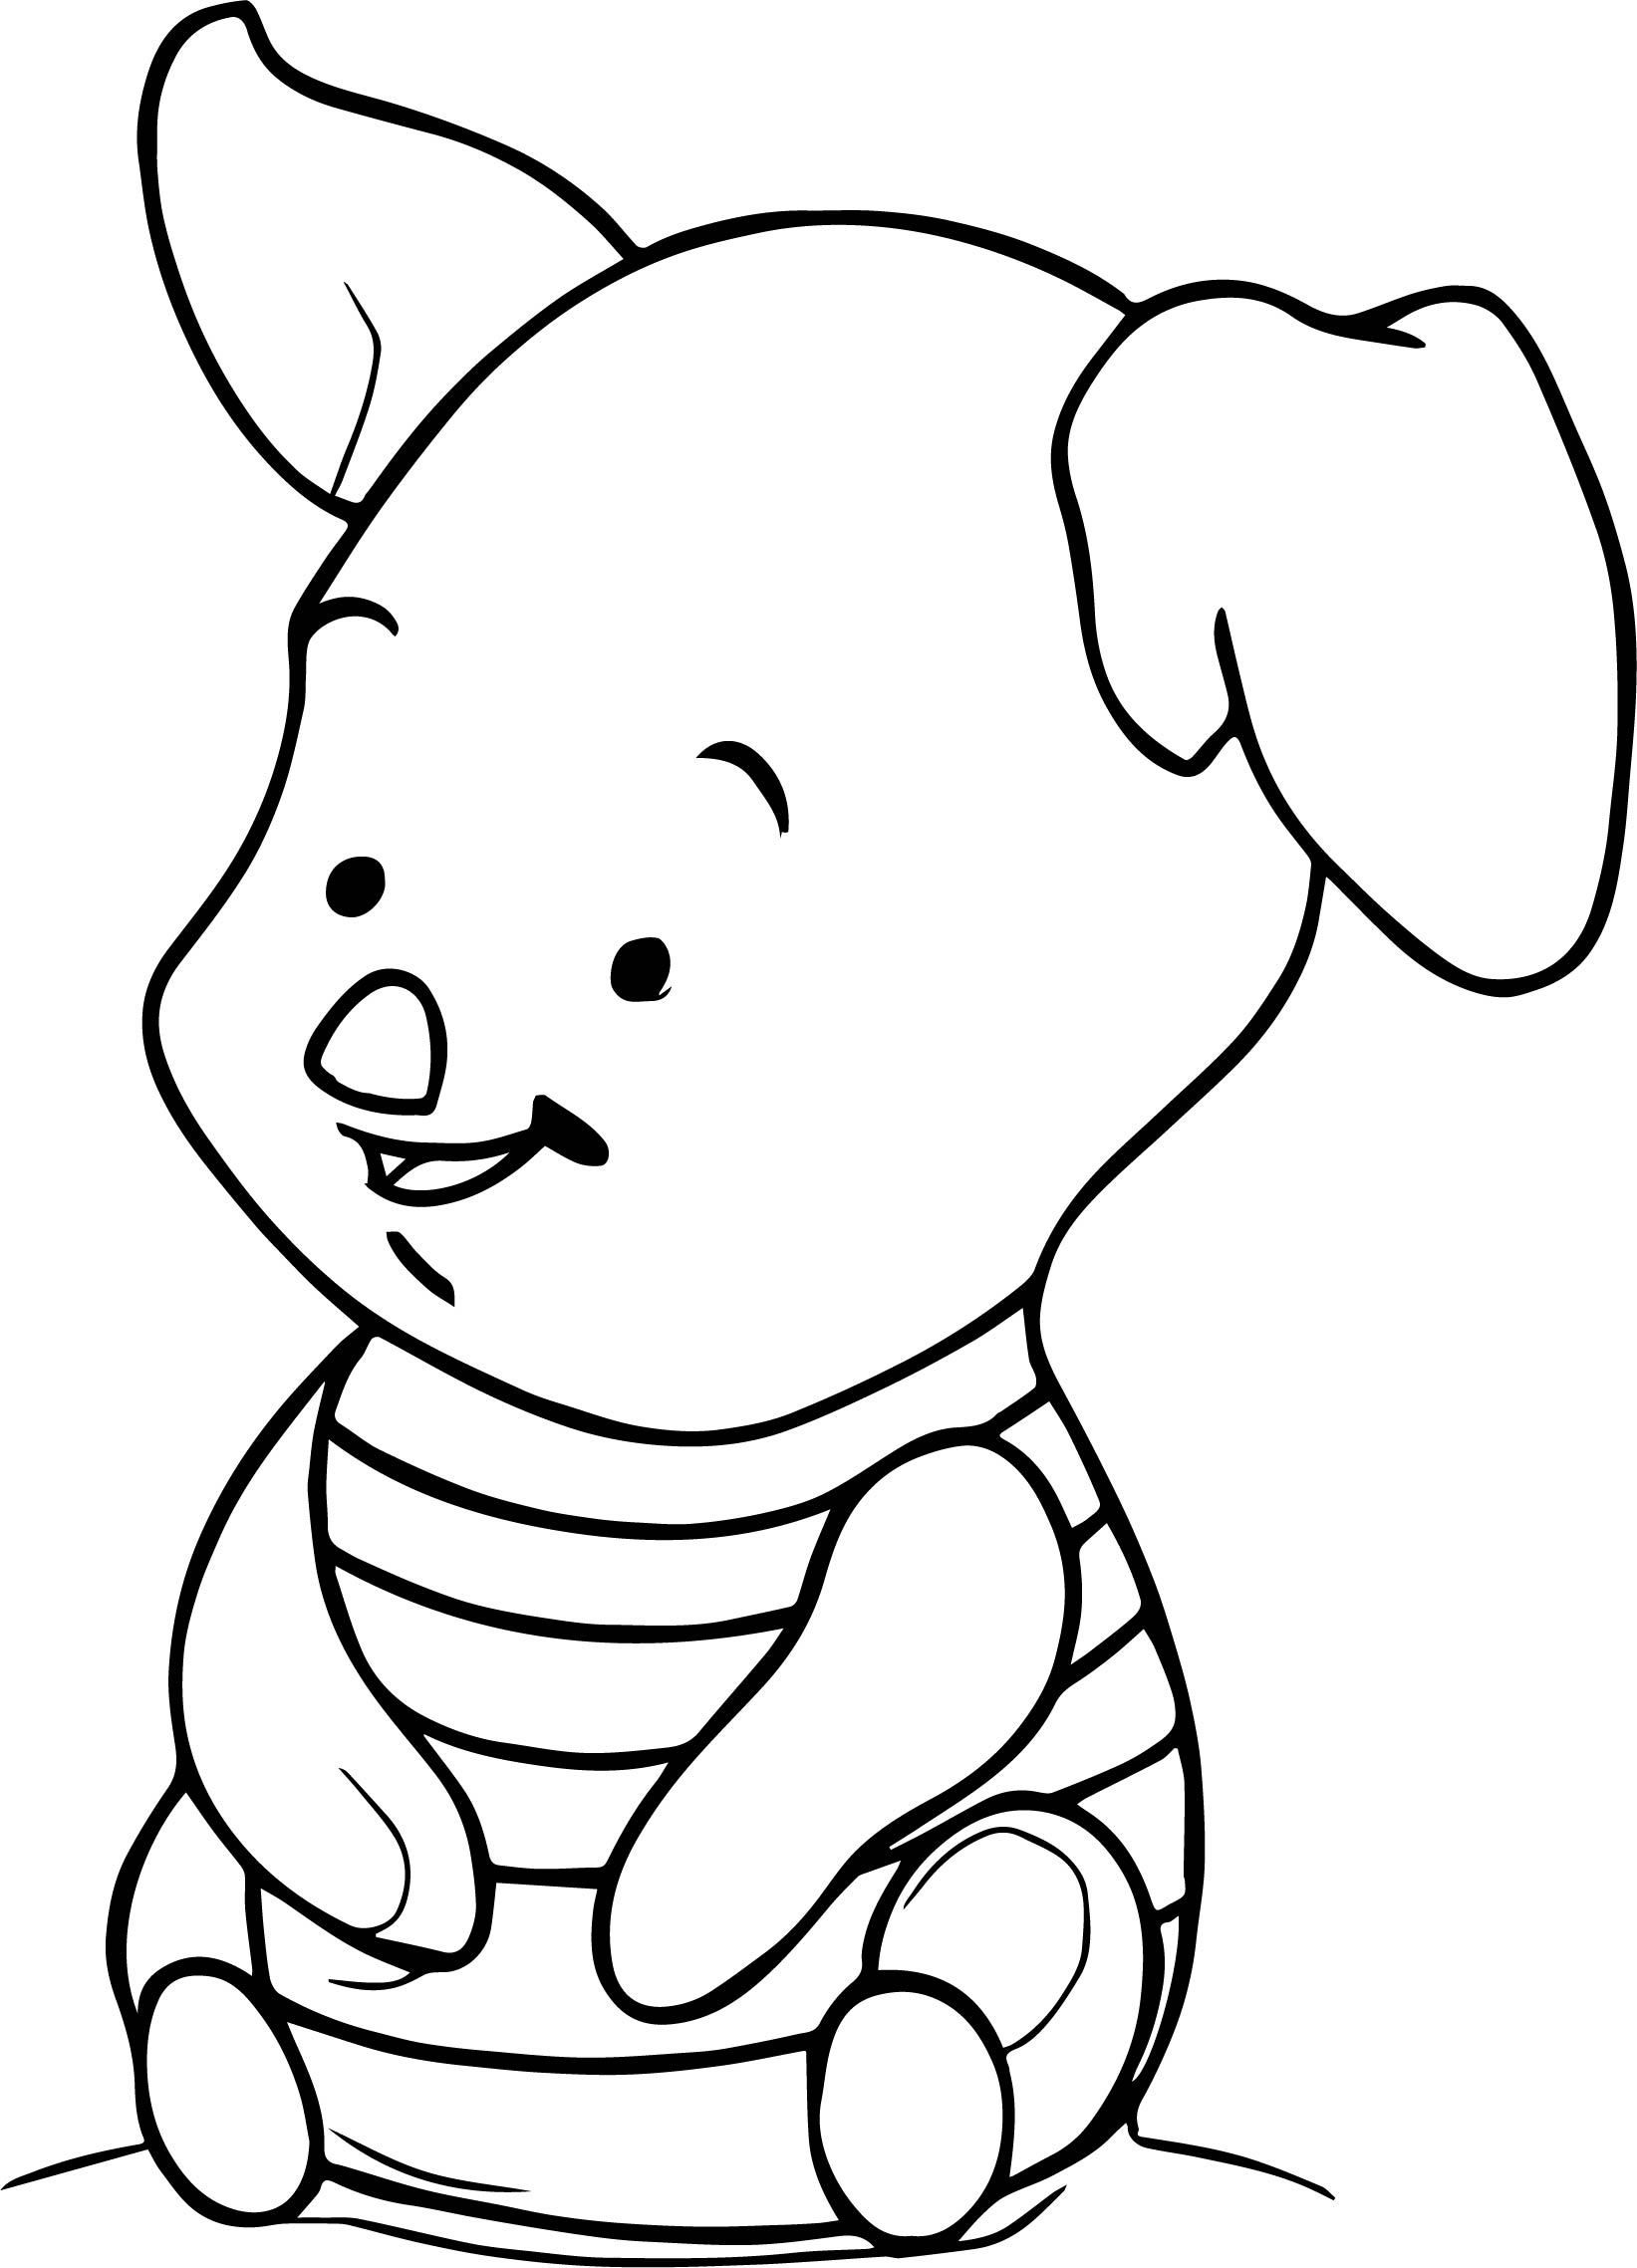 Piglet Coloring Pages at Free printable colorings